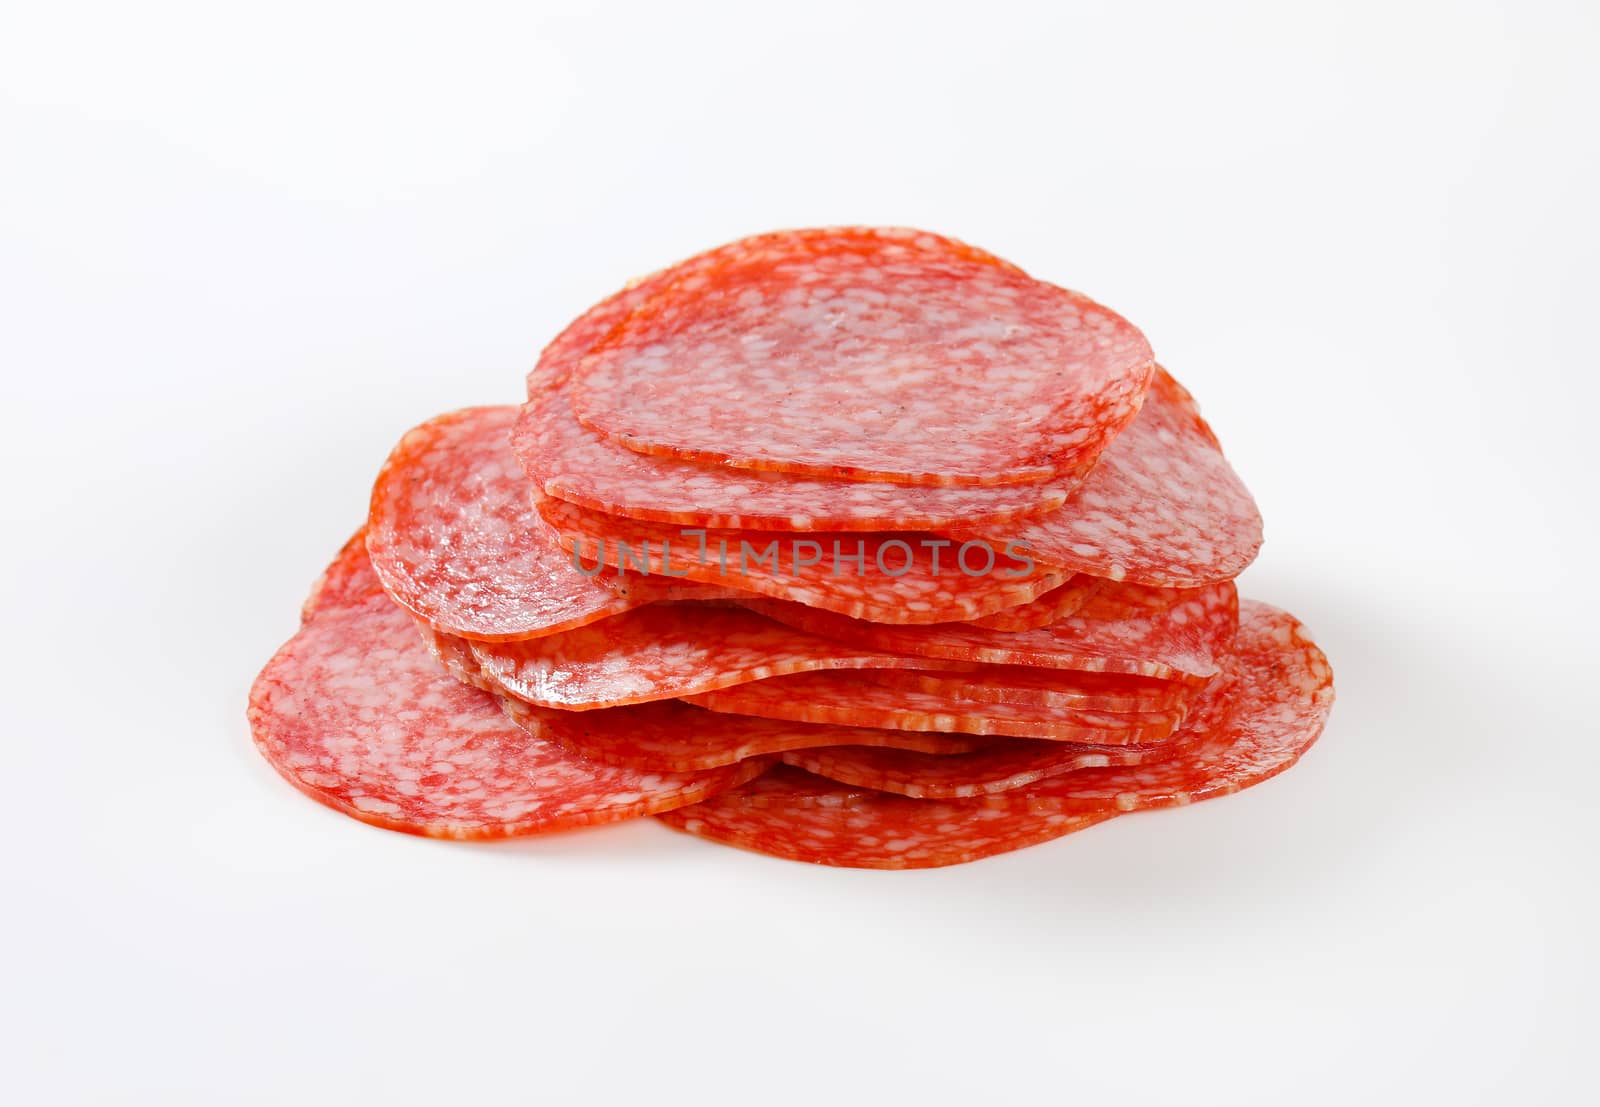 Thinly sliced salami sausage on white background